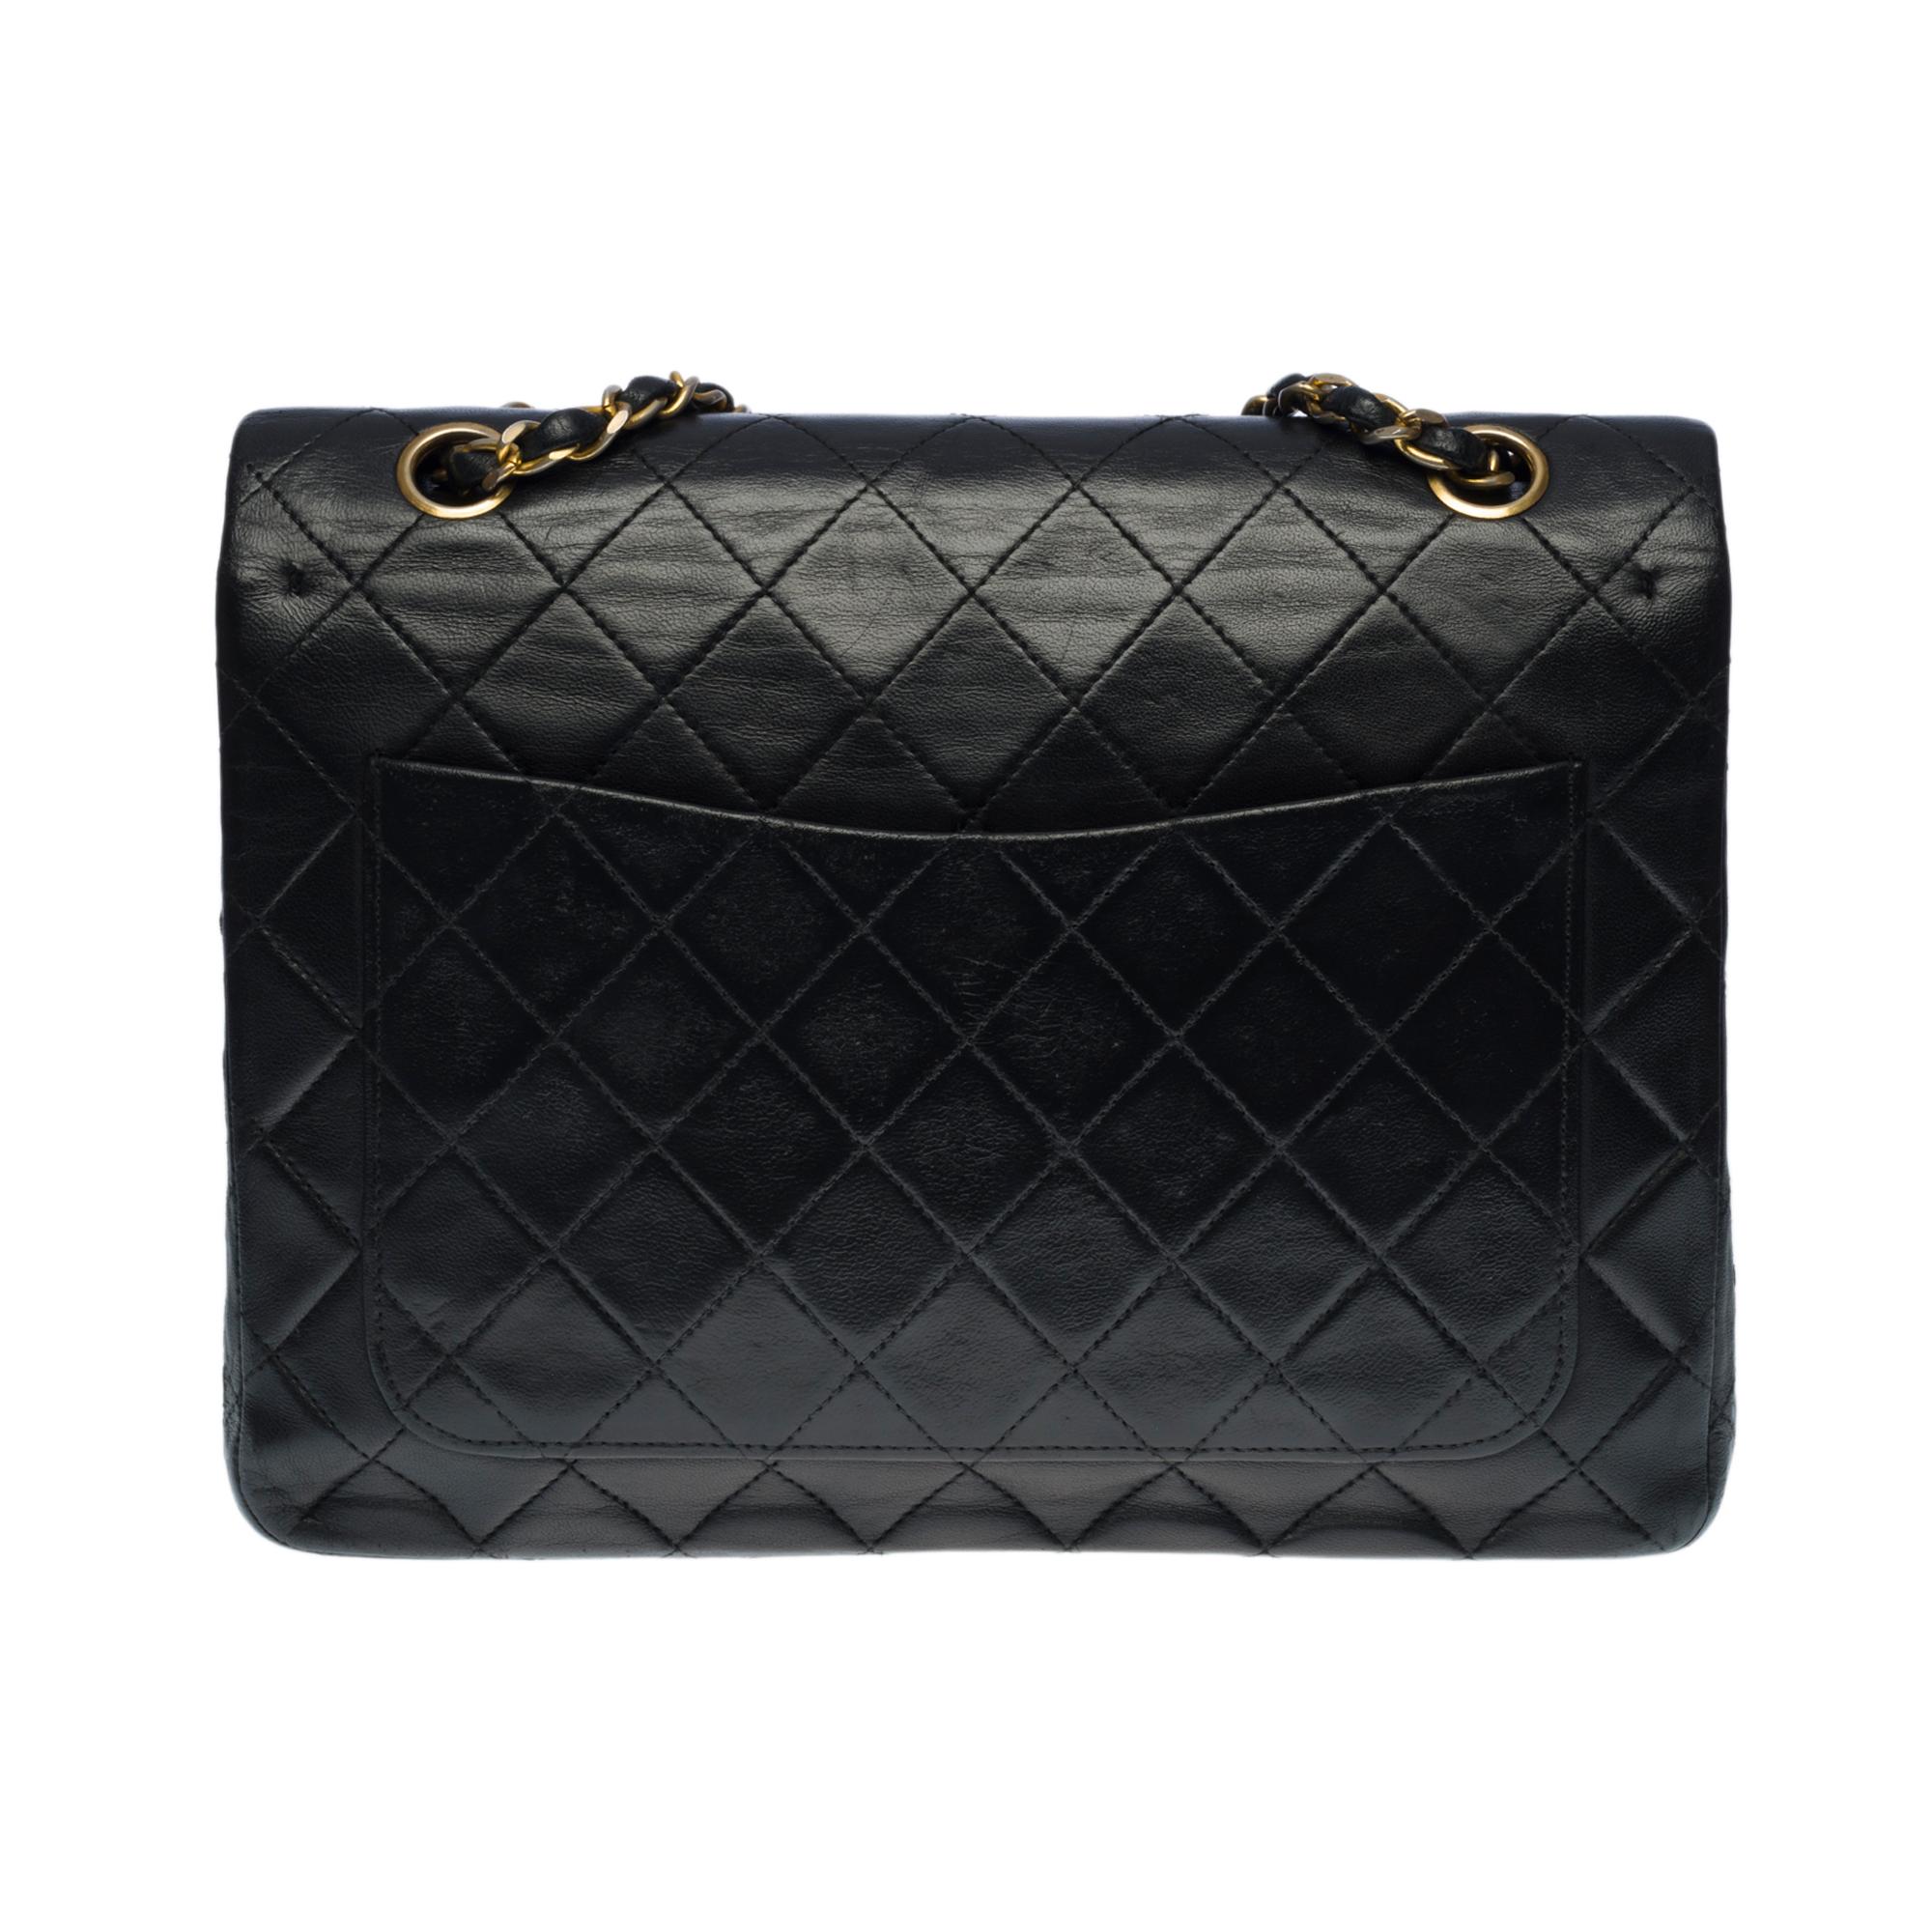 The coveted Chanel Timeless/Classique medium 25 cm bag with double flap in black quilted leather, hardware in gold metal, a chain strap in gold metal interlaced with black leather to be worn on the shoulder and across the body

Patch pocket on the